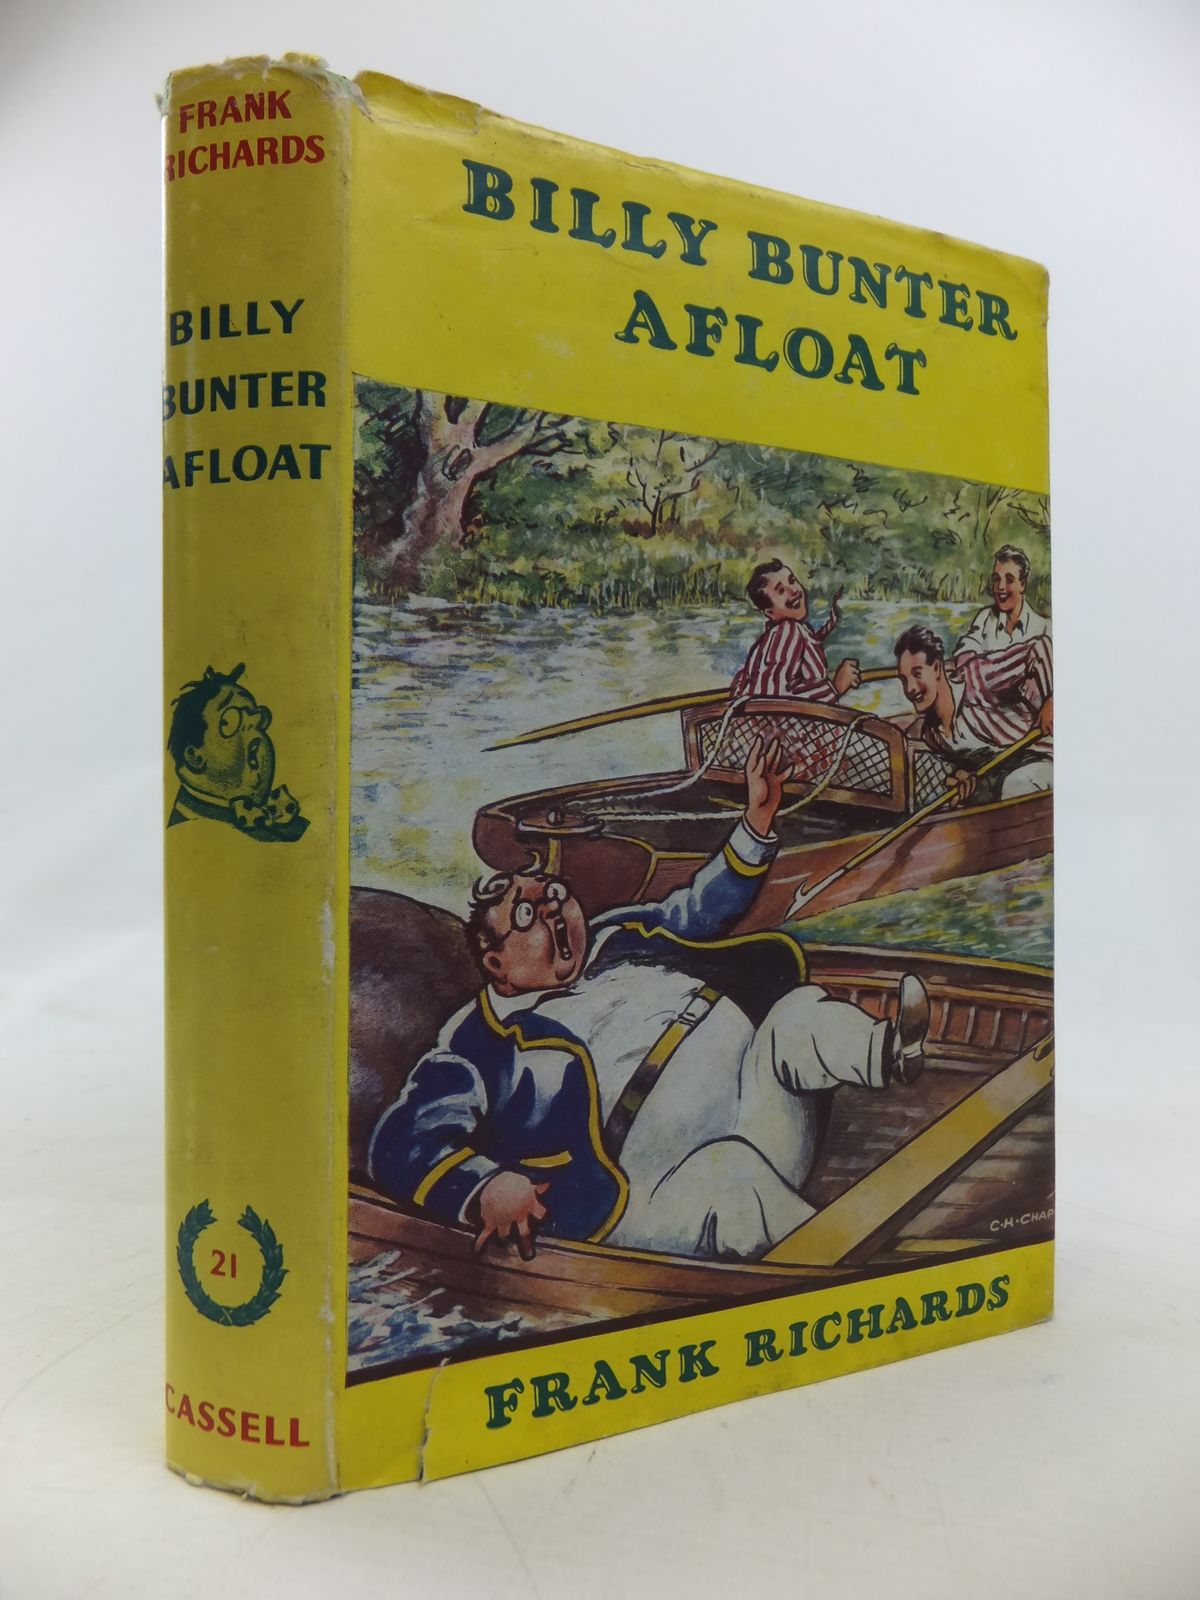 Photo of BILLY BUNTER AFLOAT written by Richards, Frank illustrated by Chapman, C.H. published by Cassell &amp; Co. Ltd. (STOCK CODE: 2115626)  for sale by Stella & Rose's Books